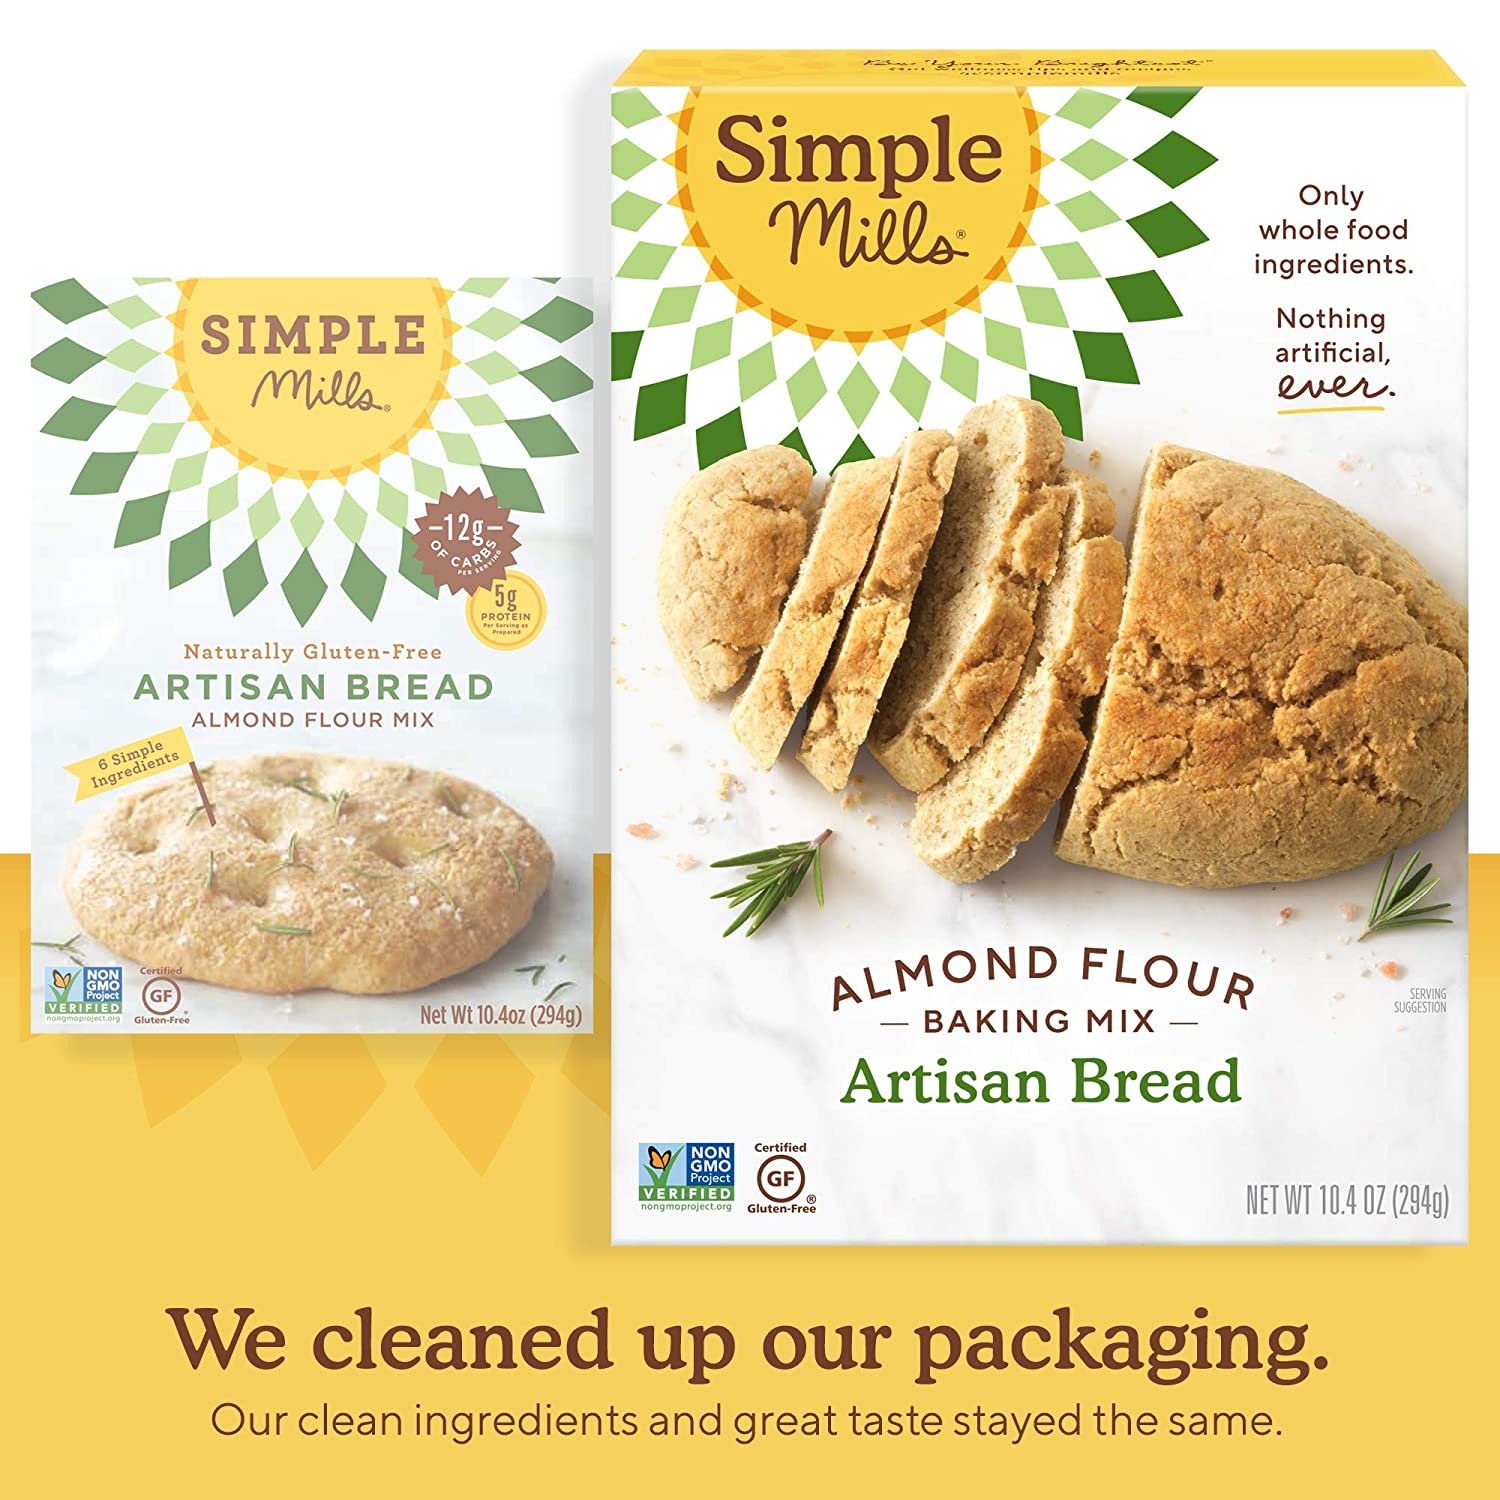 Simple Mills Almond Flour Baking Mix, Gluten Free Artisan Bread Mix, Made with whole foods